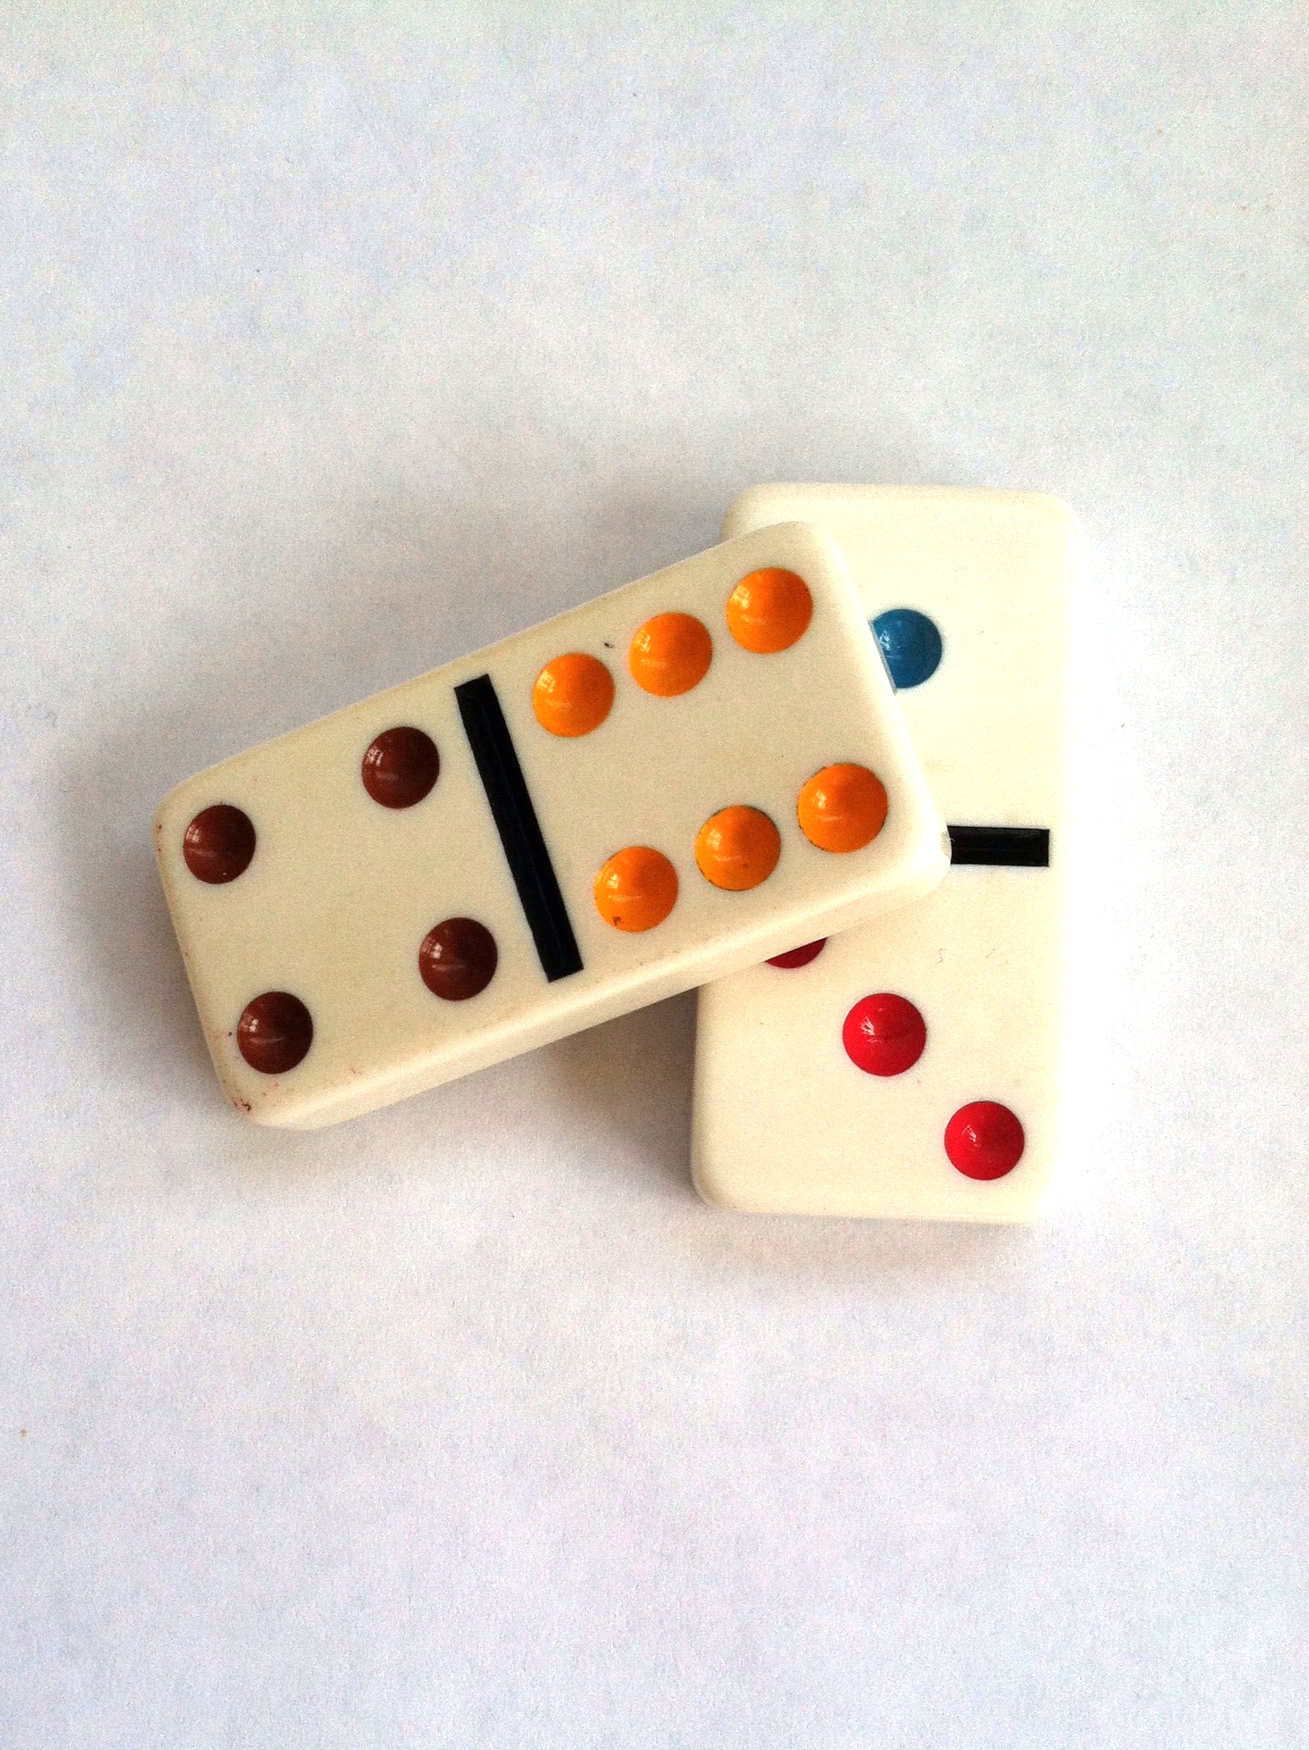 "dominoes" by Lia Kurtin on Flickr (CC BY-NC-ND 2.0)